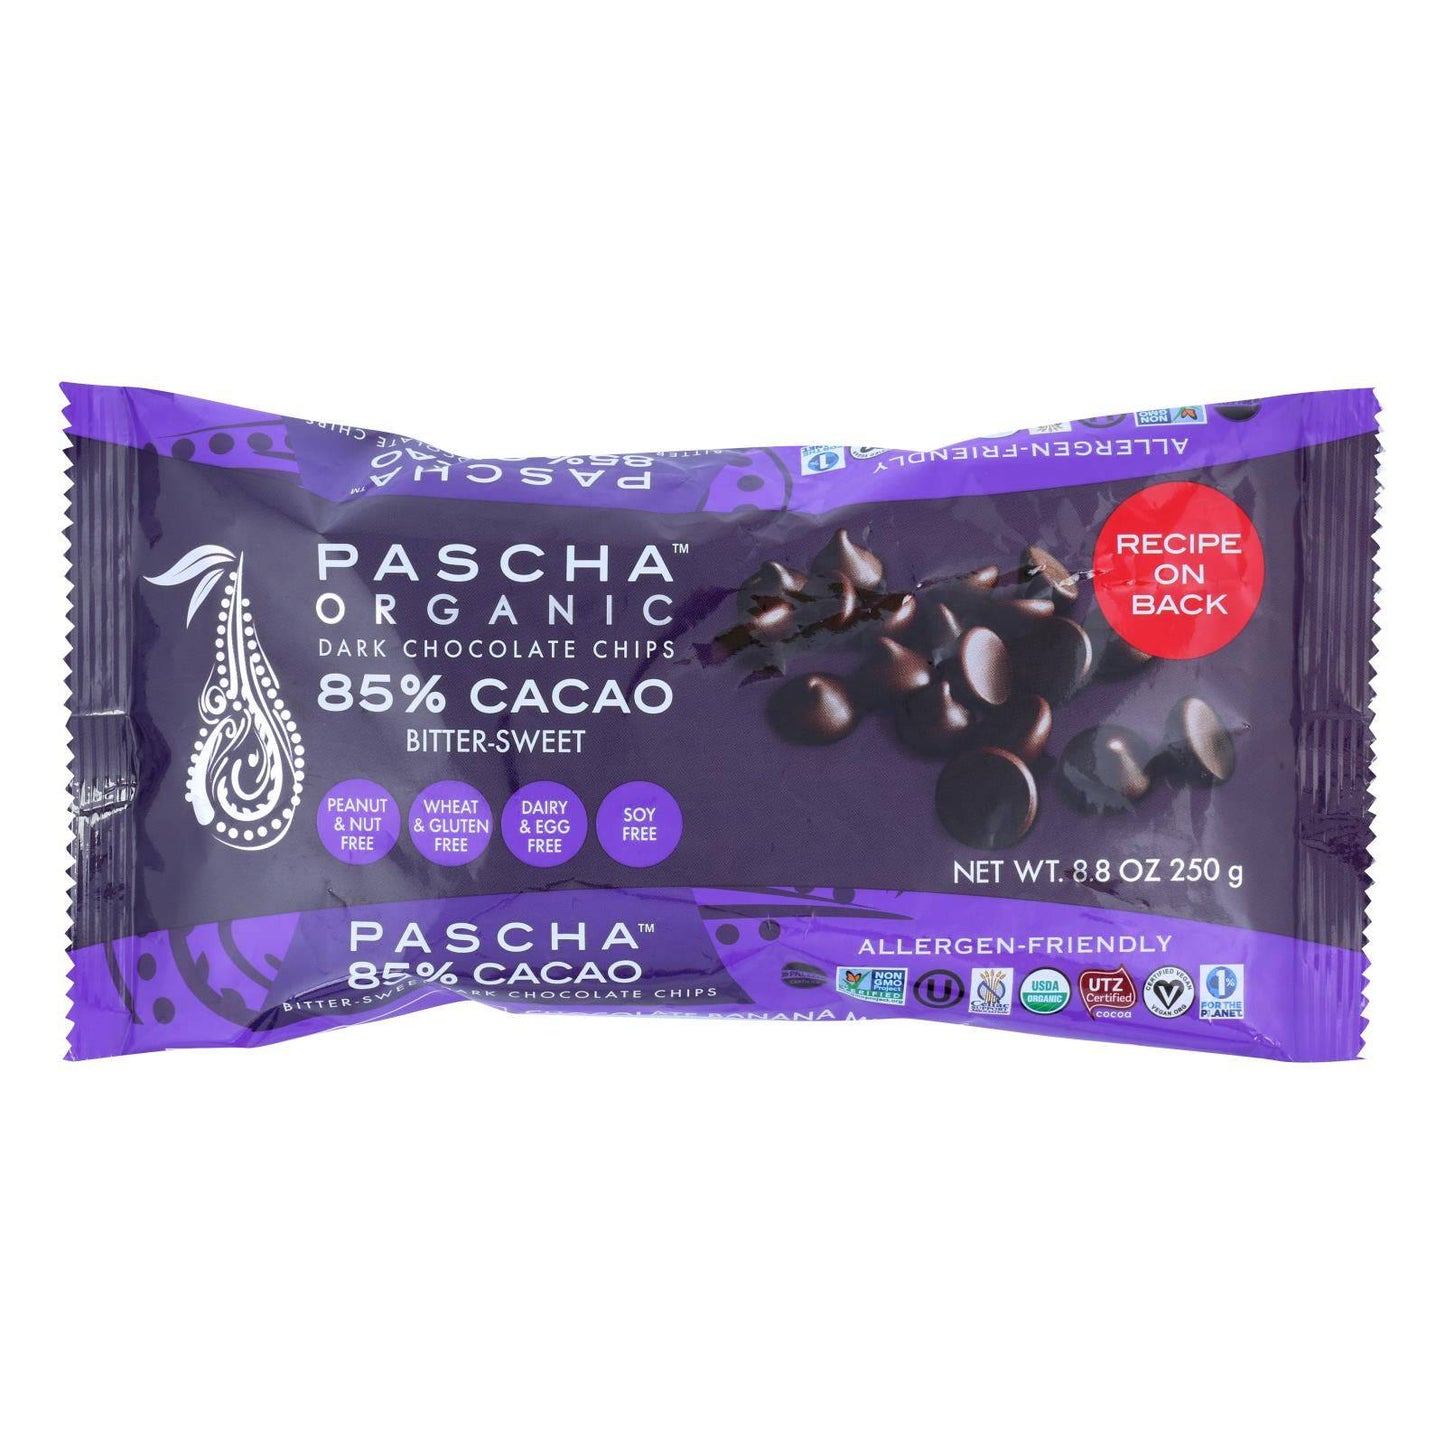 Buy Pascha Organic Chocolate Chips -bitter-sweet Dark 85% - Case Of 6 - 8.8 Oz  at OnlyNaturals.us